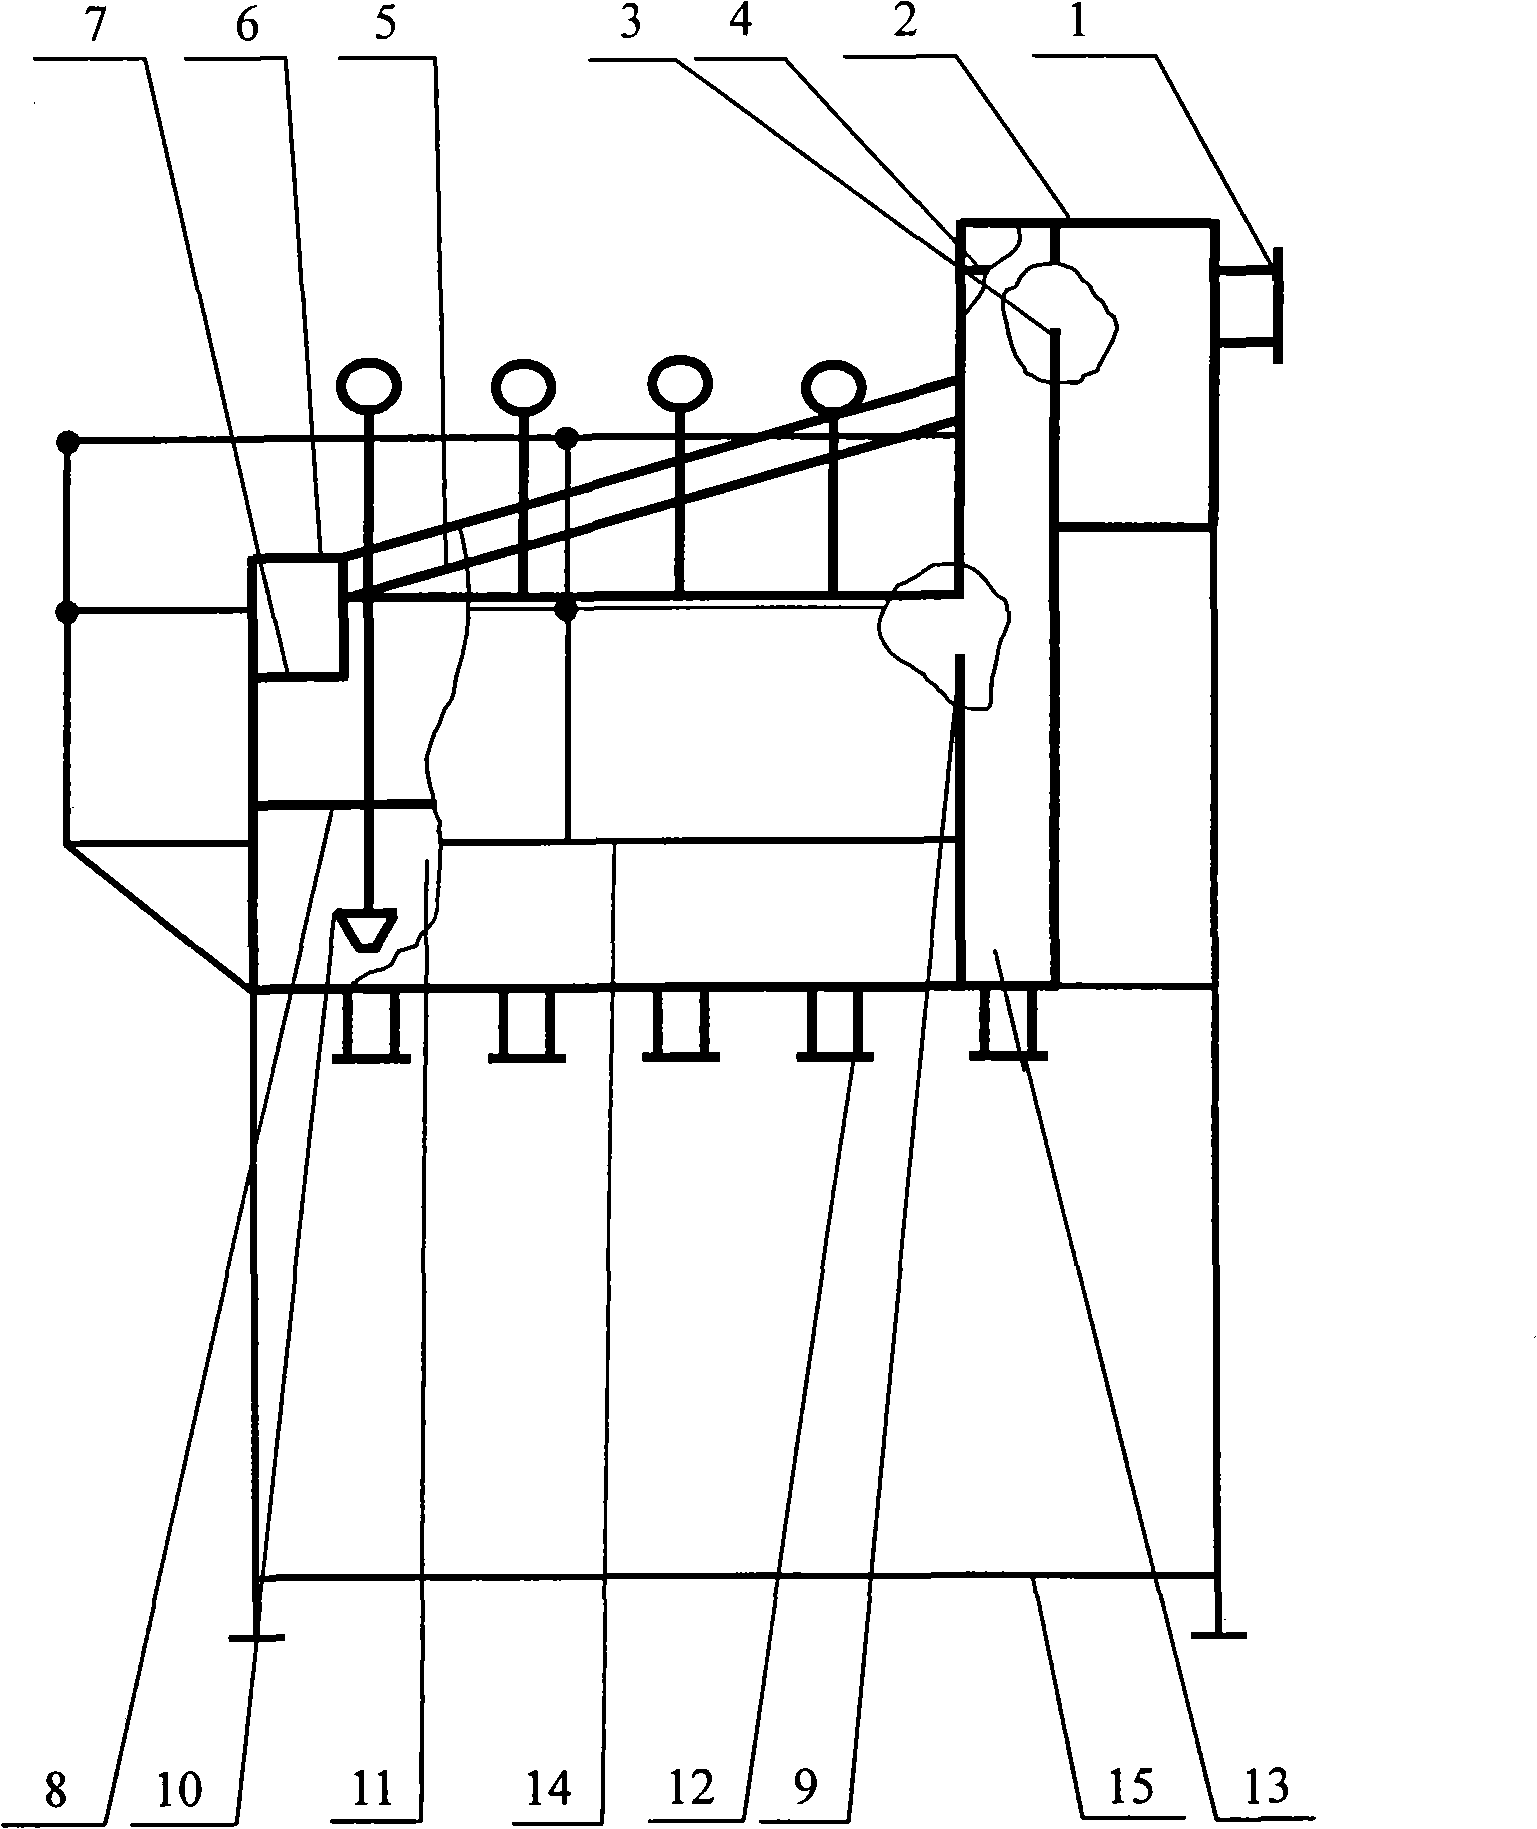 Pulp distributer provided with deslagging screen